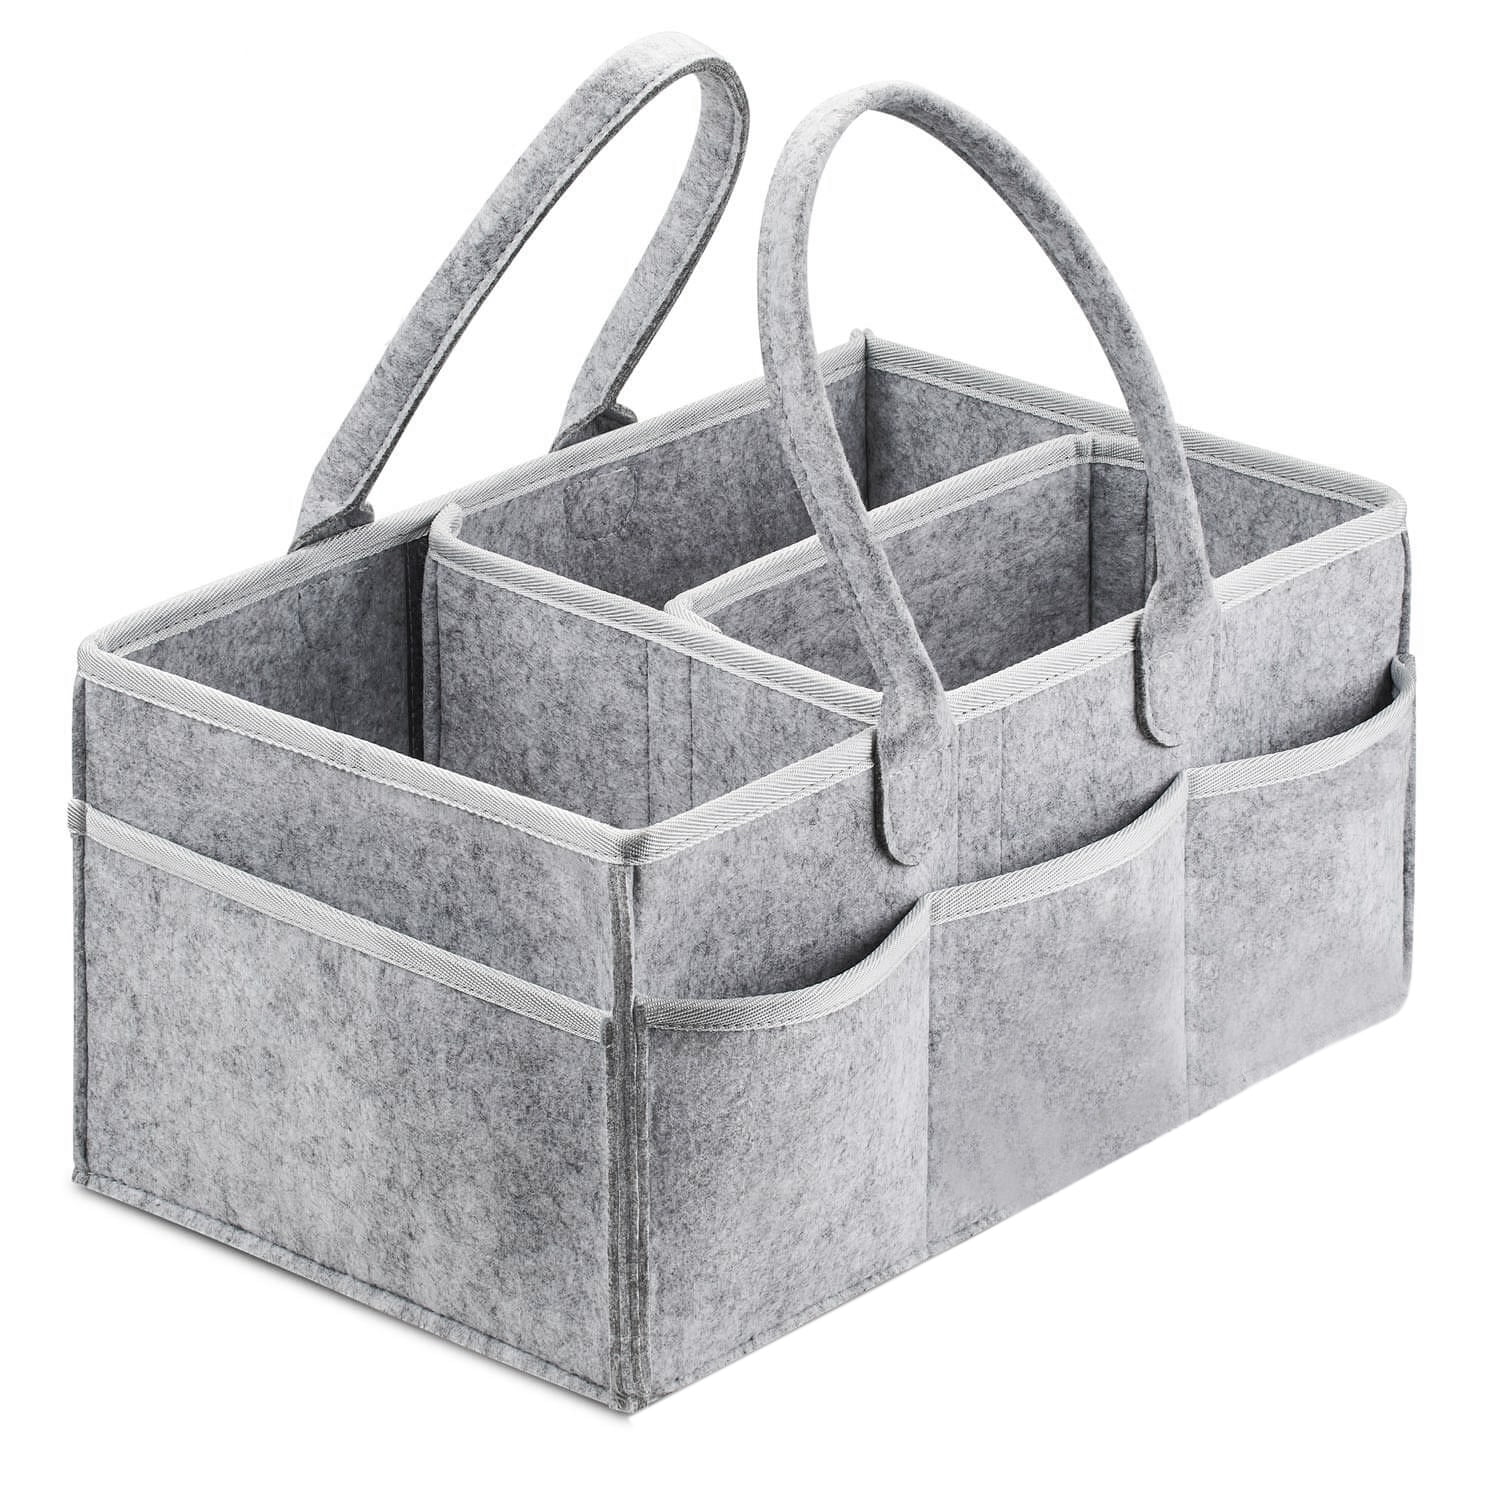 Baby Caddy for Nappy - Nursery Storage Organizer Neutral Baby Shower Basket Heather Gray, Large Portable Baby Diaper Caddy Organizer for Changing Table or Car 